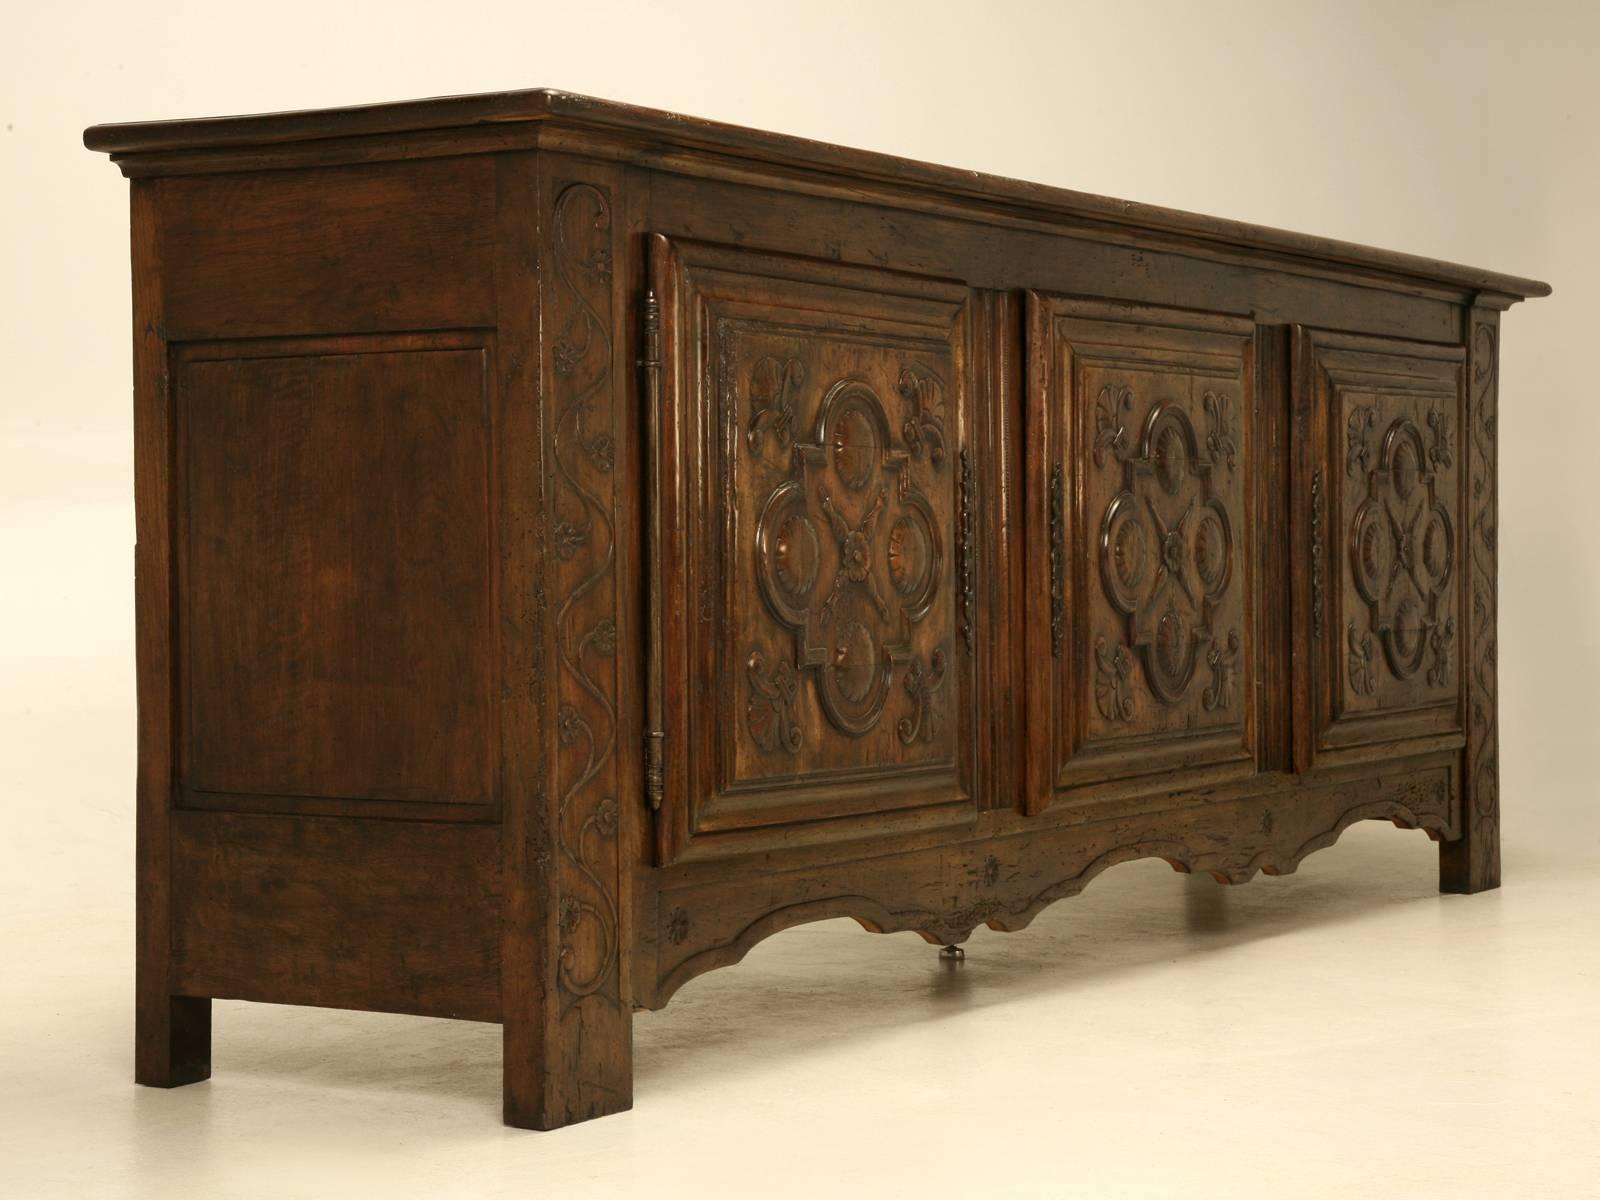 An unusually large scale antique Spanish buffet that has the appearance of an 18th century piece, but we believe it was made in the early 1900s to look like it was 200 years older. Incredibly heavy construction and will undoubtable last forever.